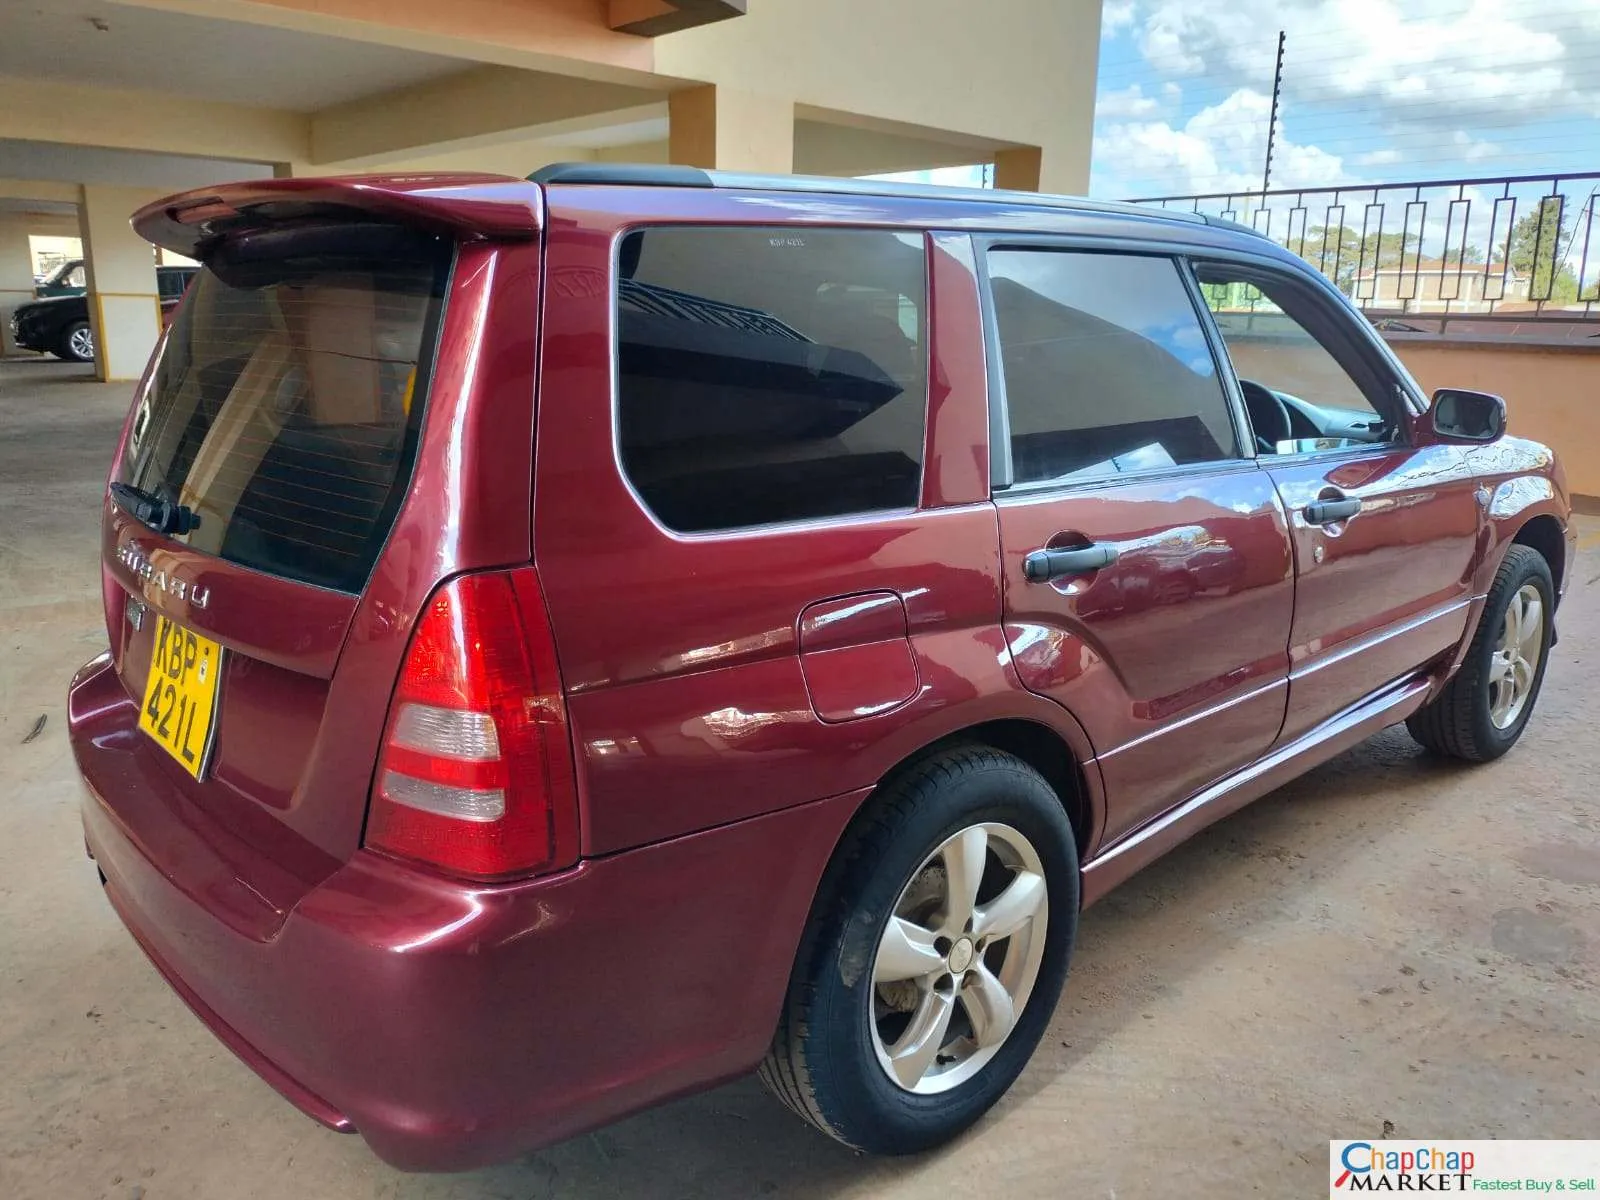 Cars Cars For Sale-Subaru Forester kenya SG5 You Pay 30% deposit Trade in Ok Subaru Forester for sale in kenya hire purchase installments EXCLUSIVE 9